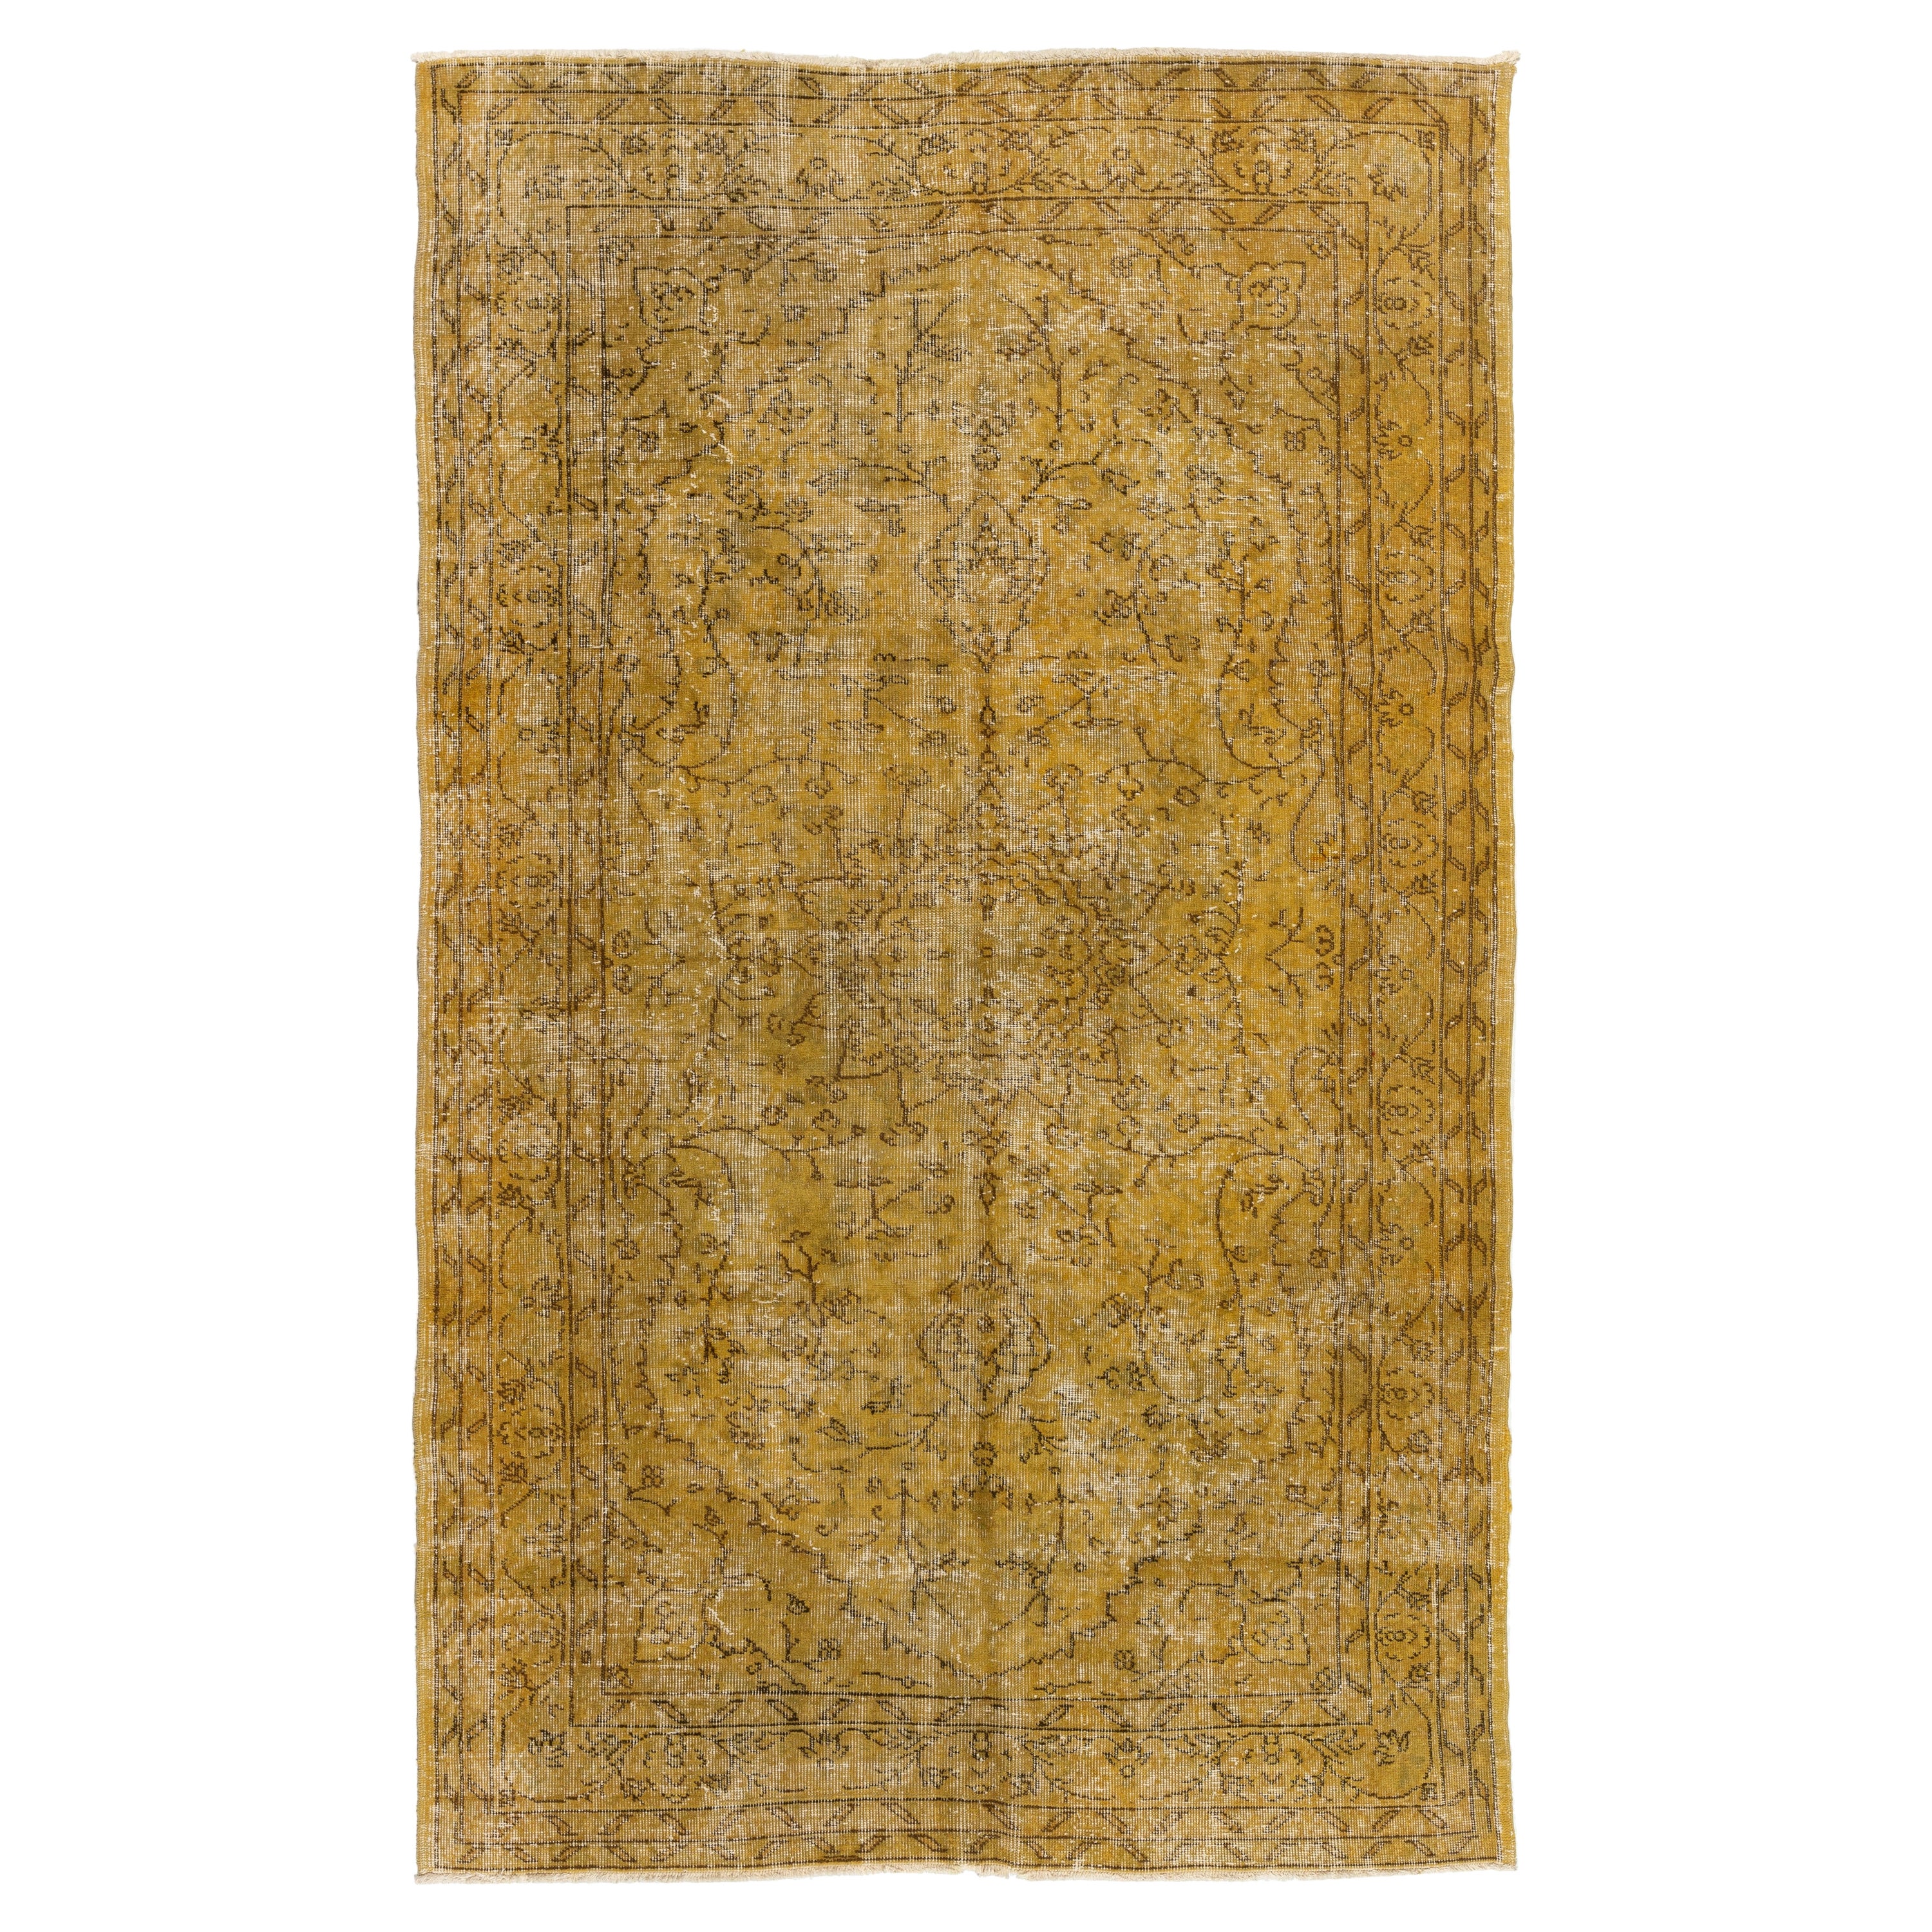 5.2x8.5 Ft Hand-Made Vintage Turkish Area Rug in Yellow 4 Modern Interiors For Sale